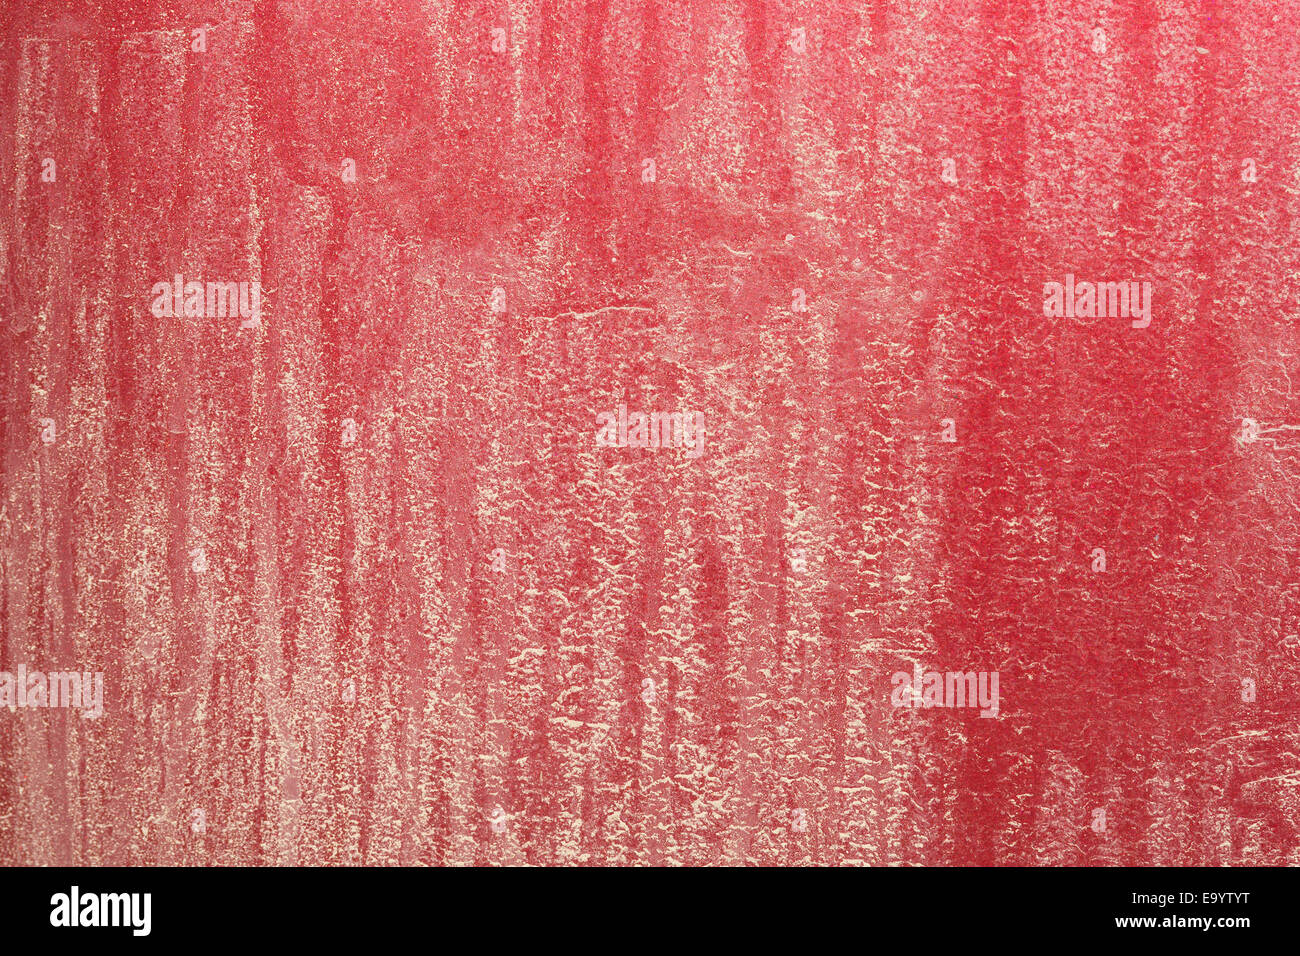 A very close view of an exceptionally dirty red car rear bumper. Stock Photo